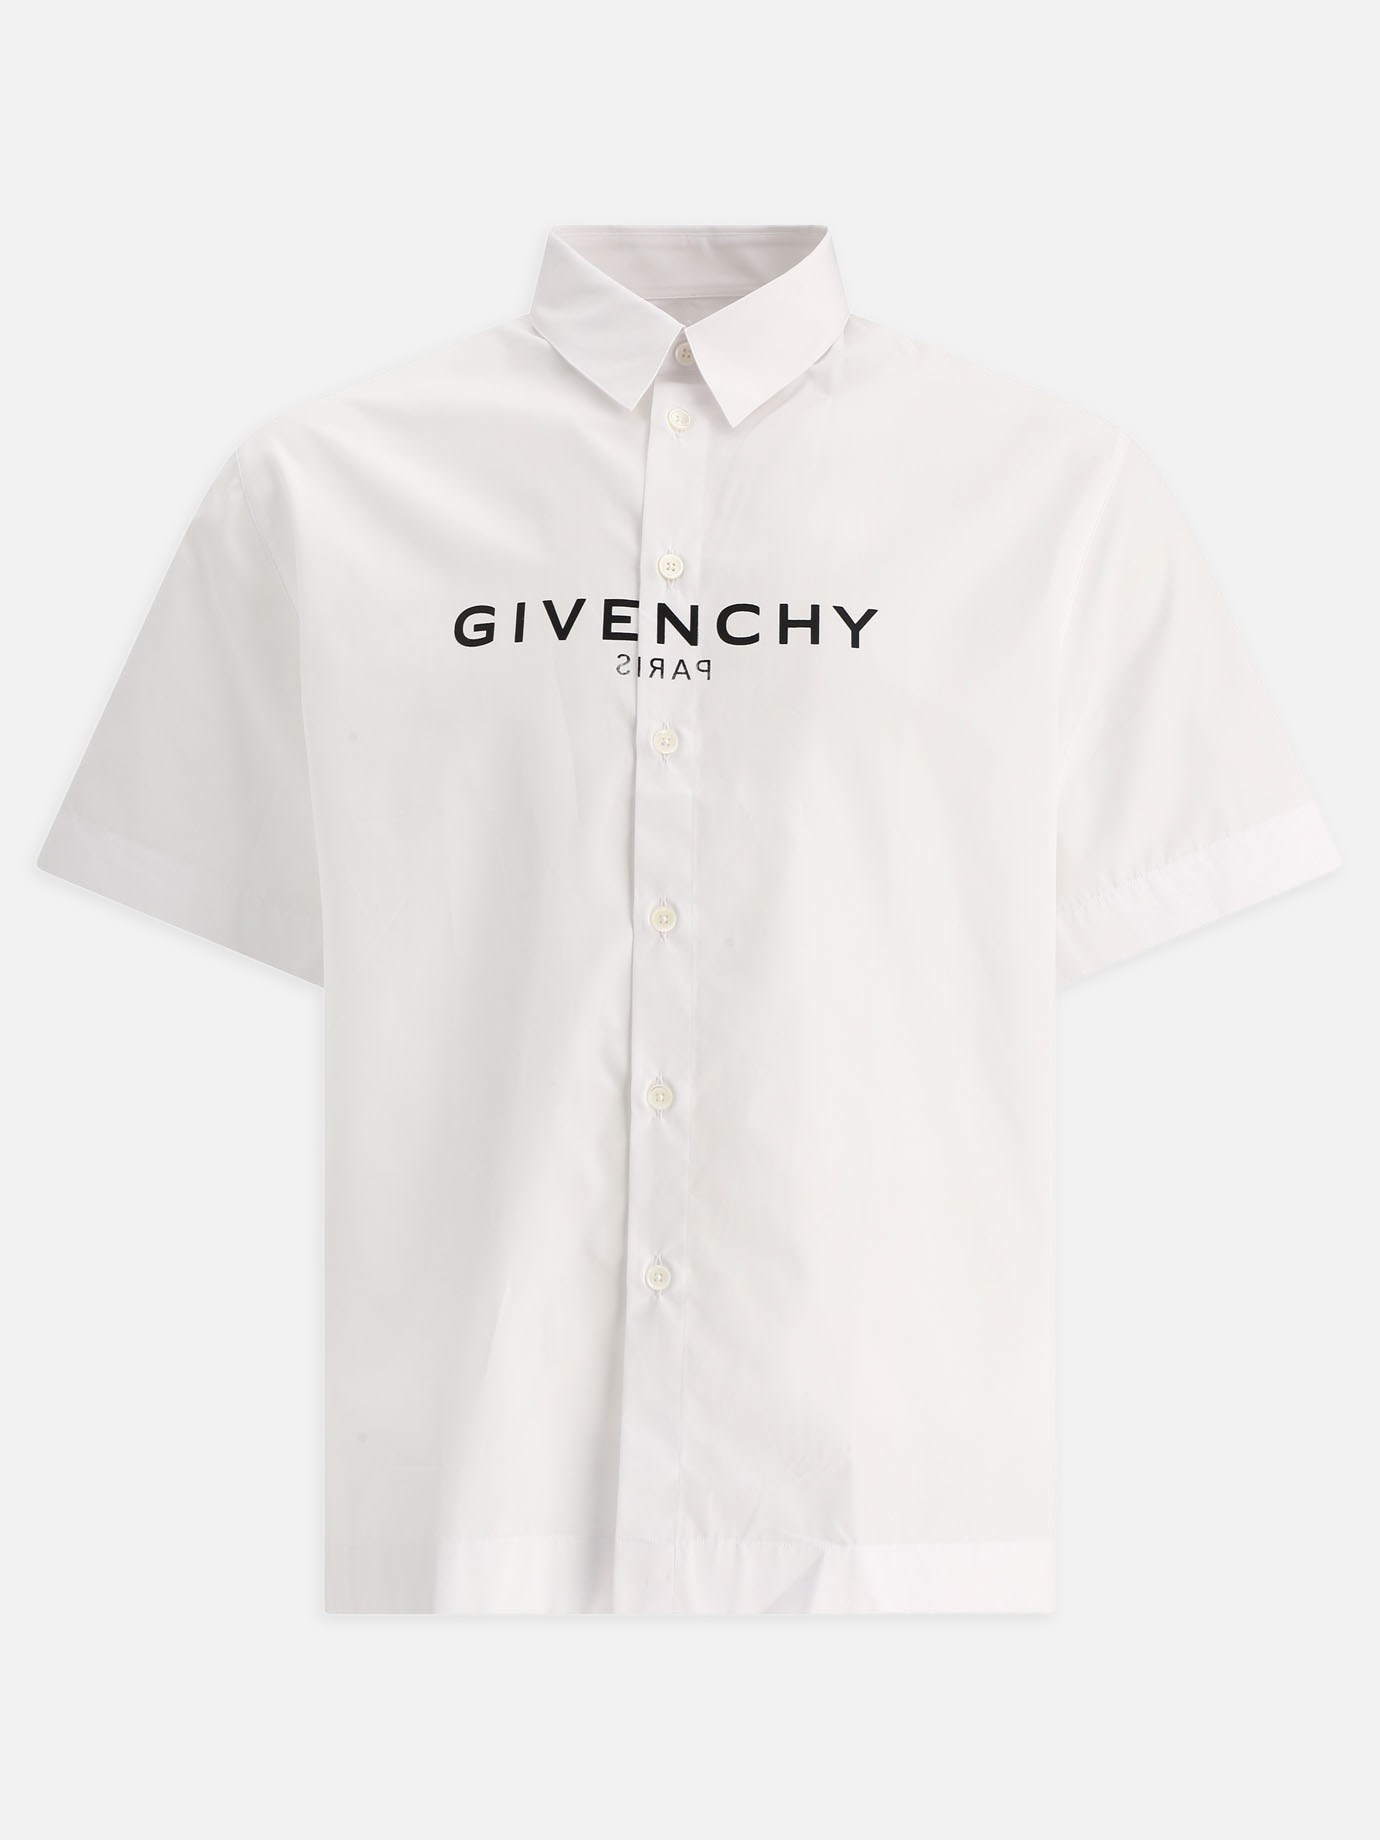  Givenchy Reverse  shirtby Givenchy - 4